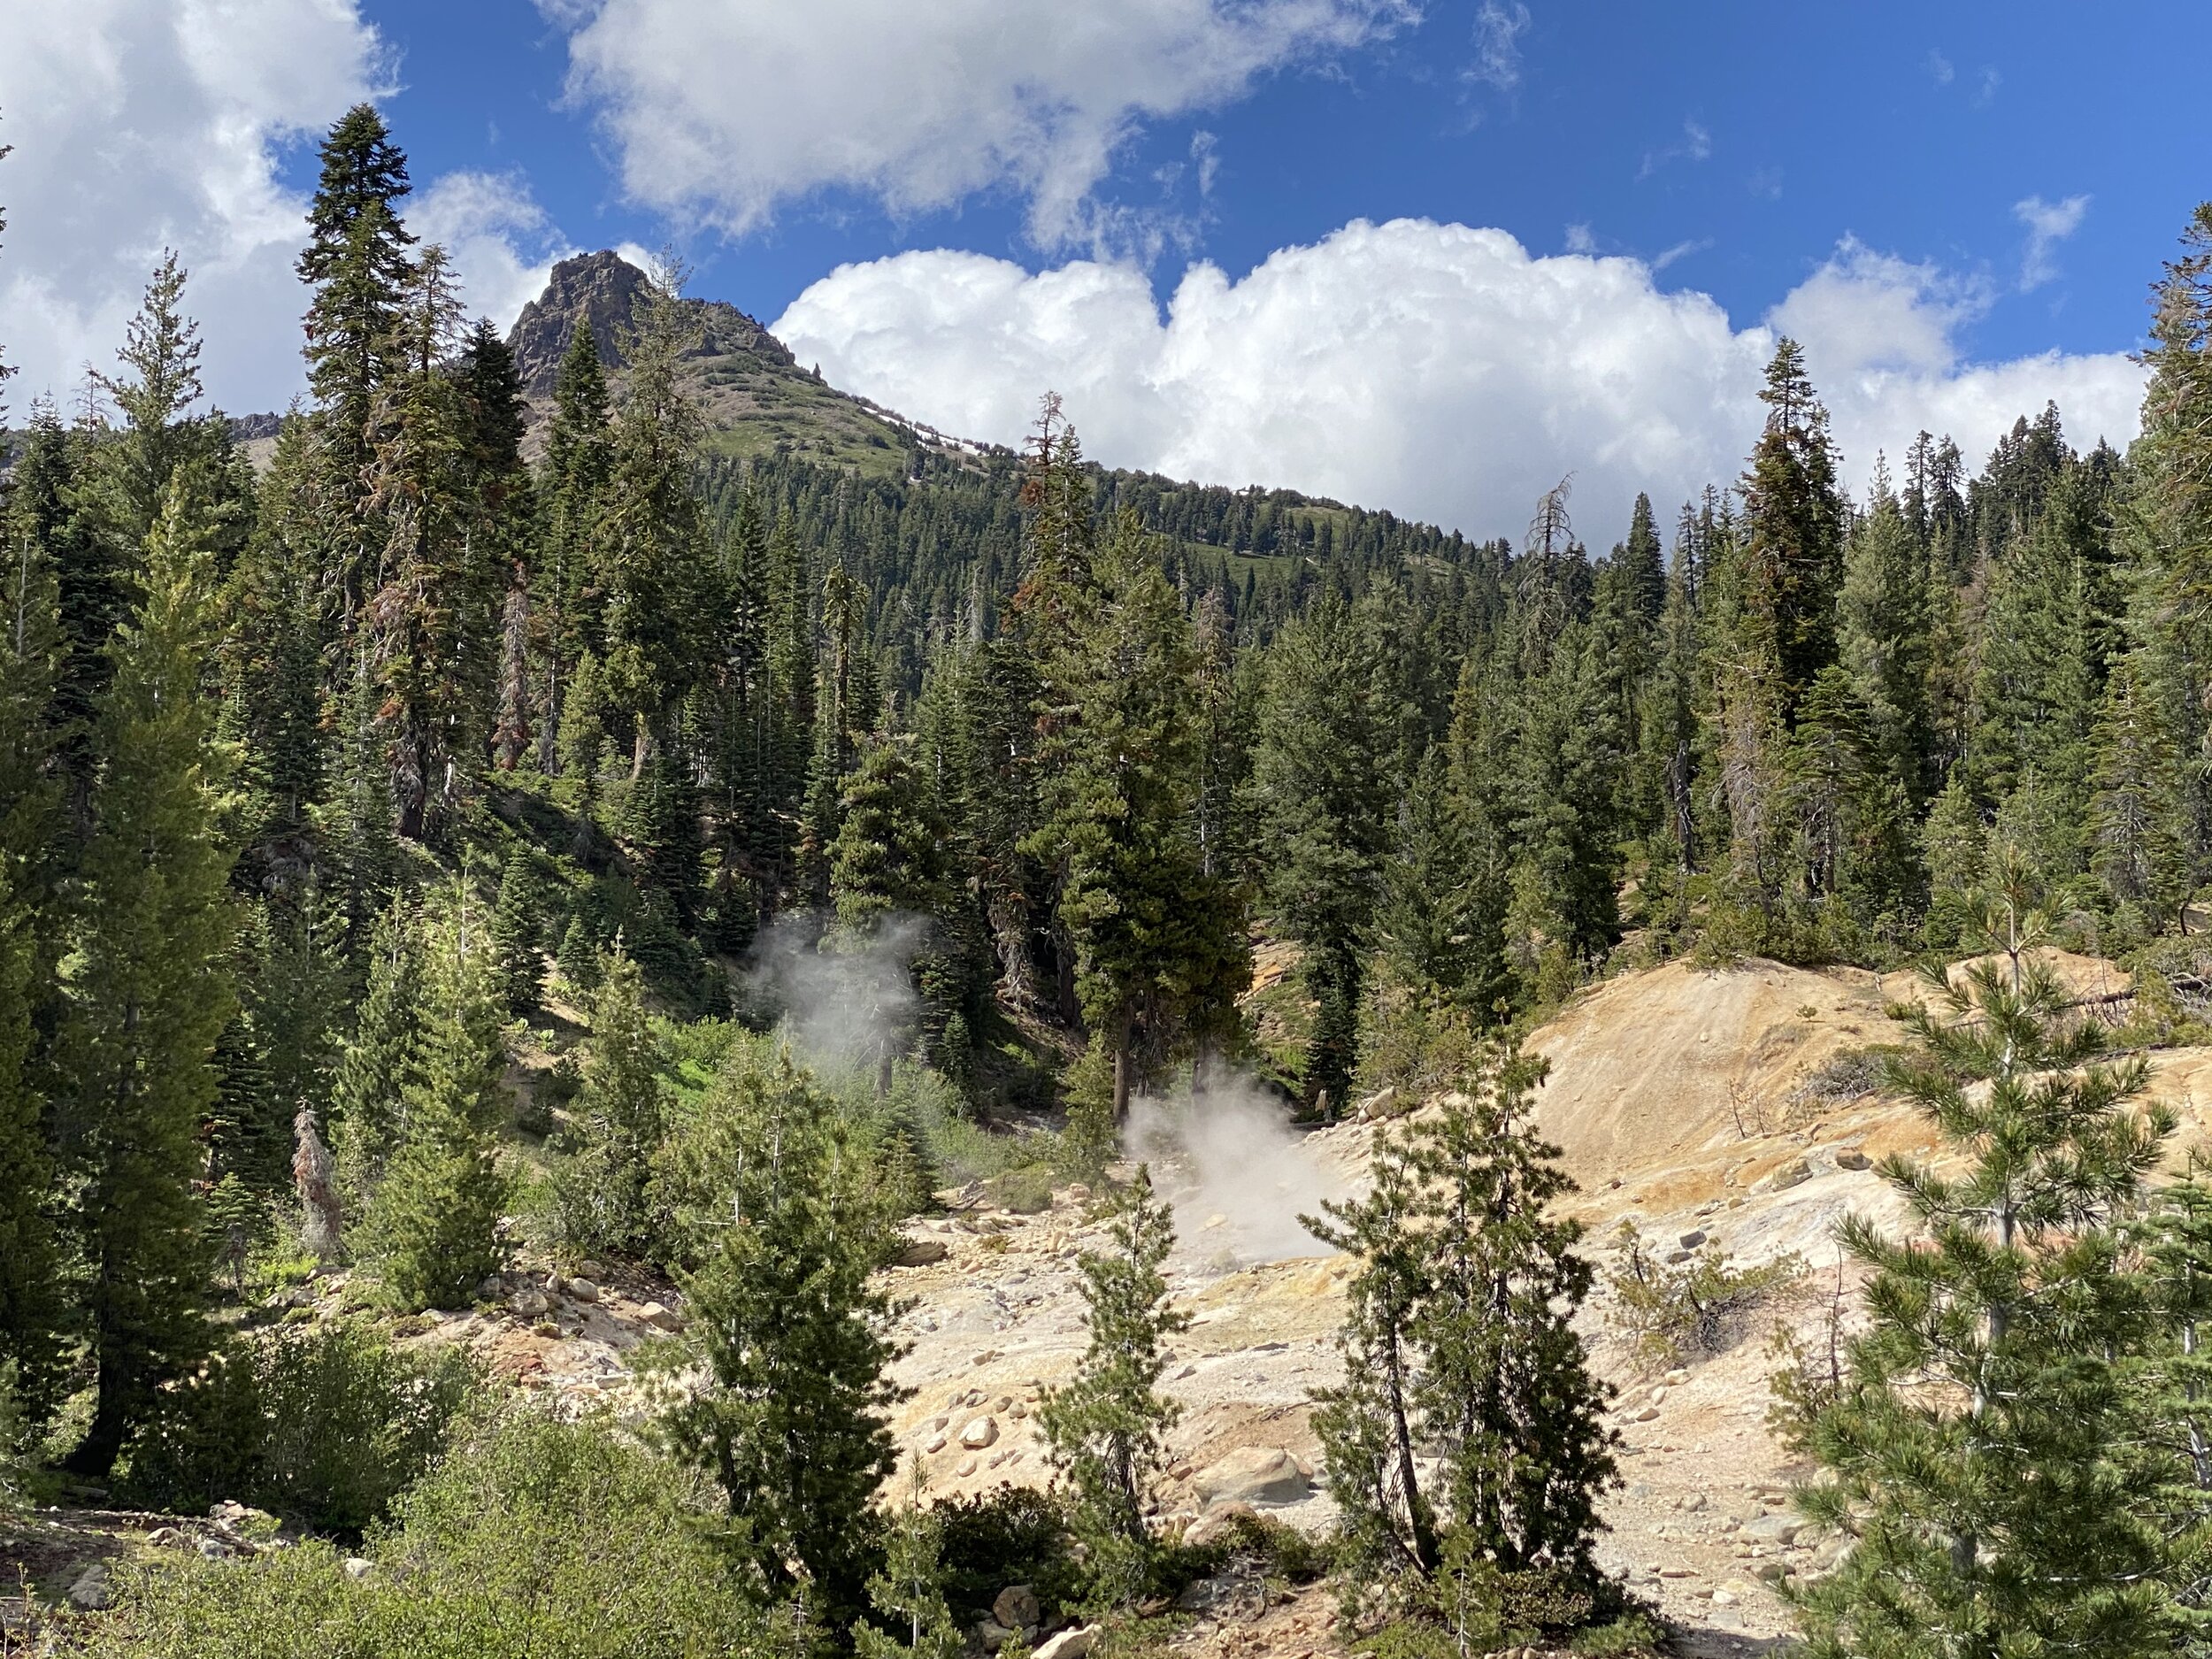 Gorgeous mountain and forest views beyond the smoking thermal features at Sulphur Works.  Photo by Karen Boudreaux, June 8, 2021